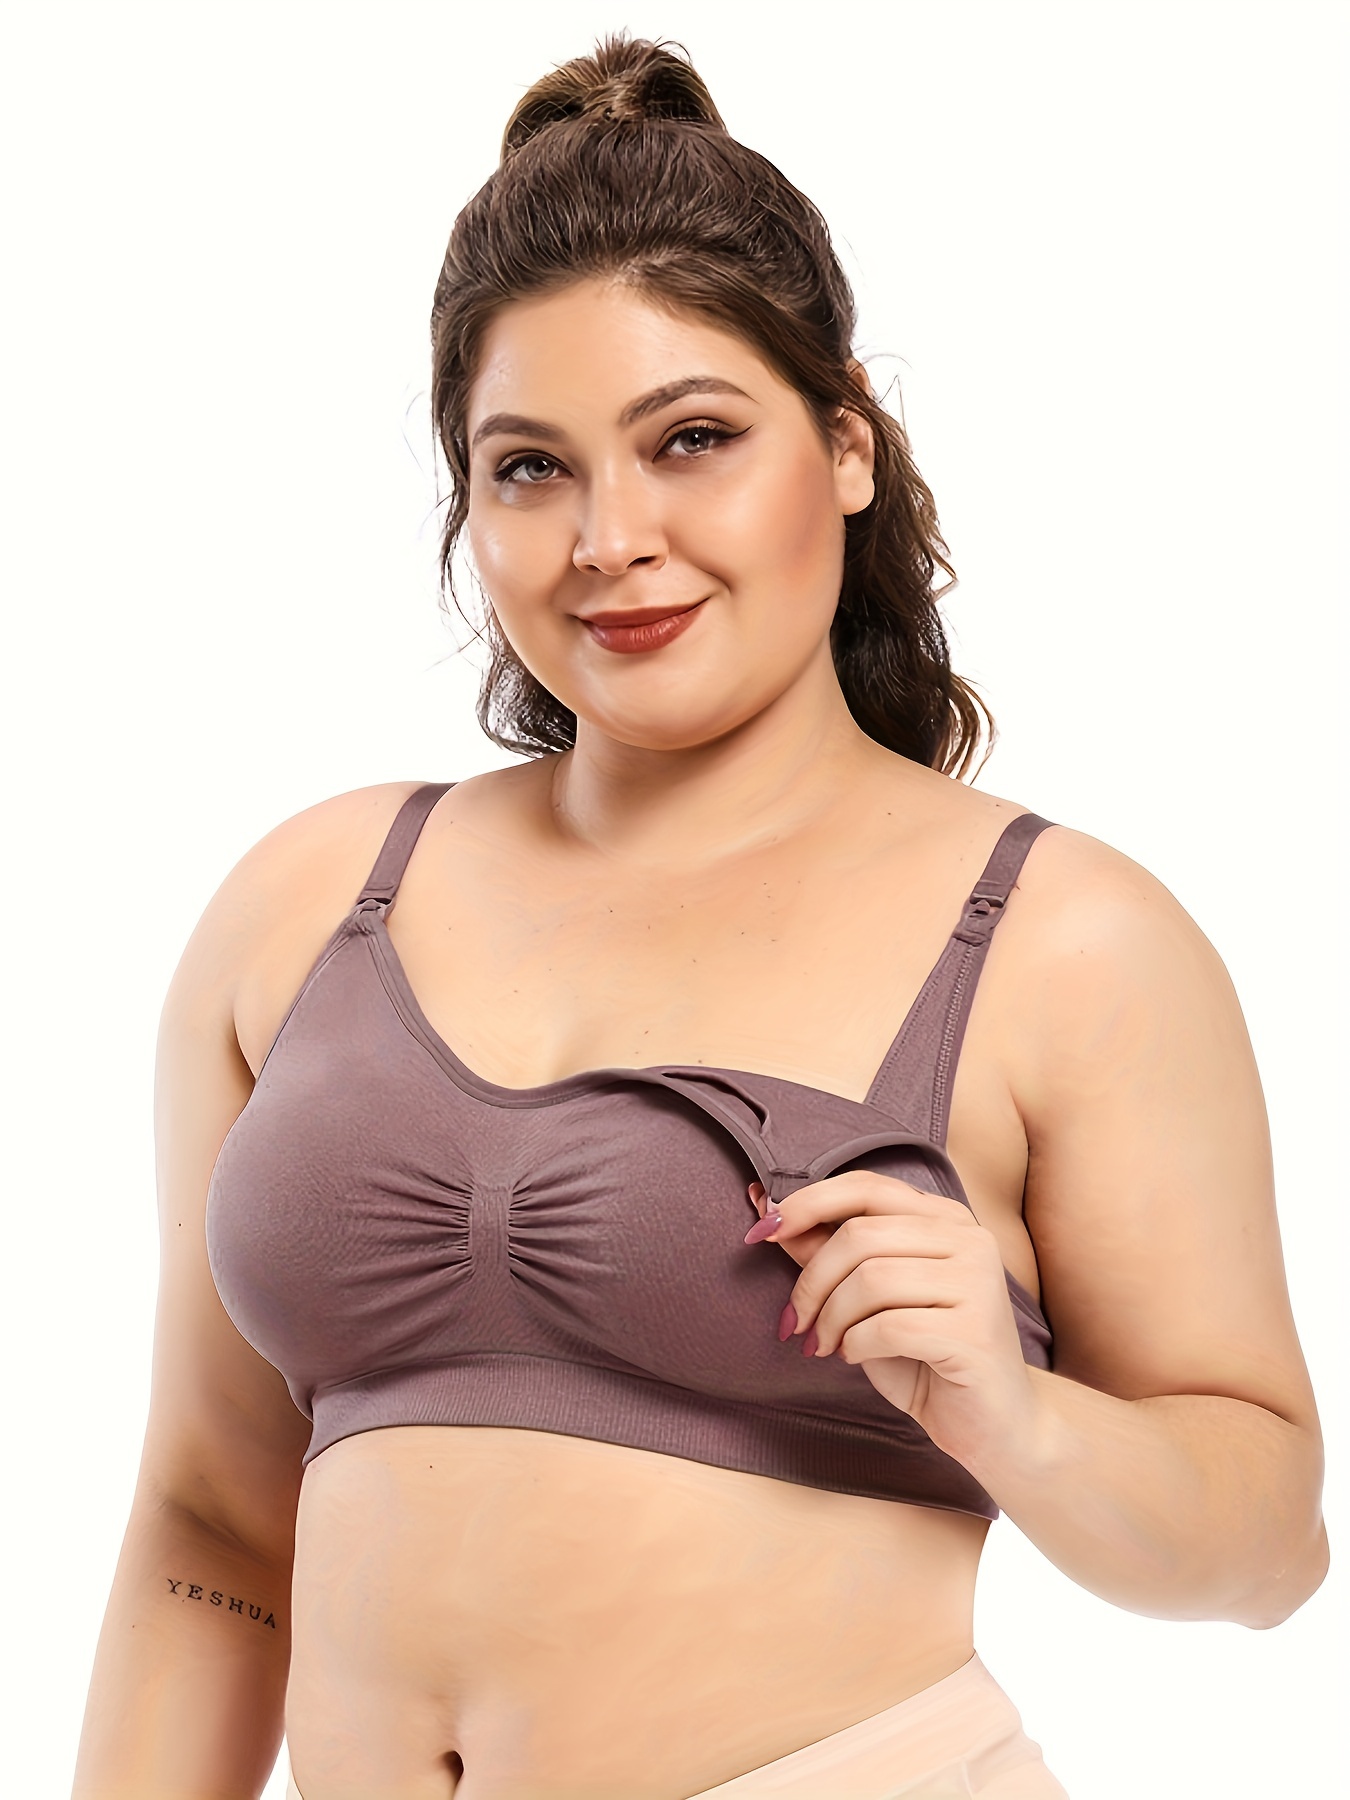 LeeWear Women Nursing Button Front Closure Bras Plus Size Wireless Sleep Bra  (no Pads) Imported from china Cotton pink, cream and apricot color  04_05_10BR22104